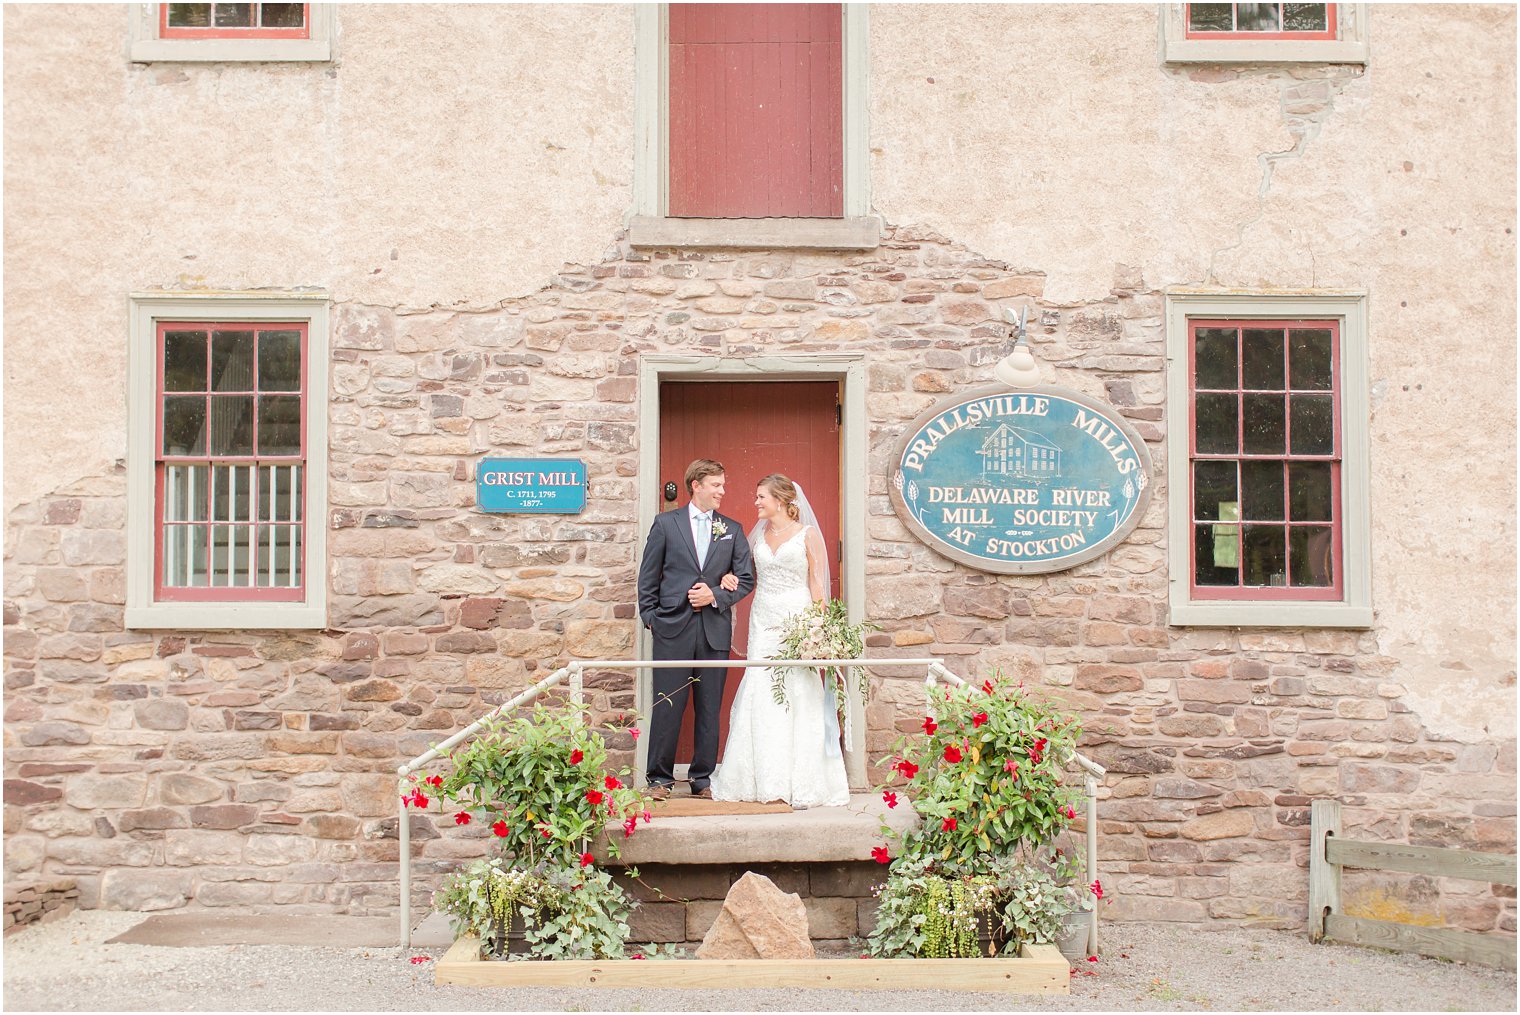 Prallsville Mills bride and groom portrait photographed by Idalia Photography